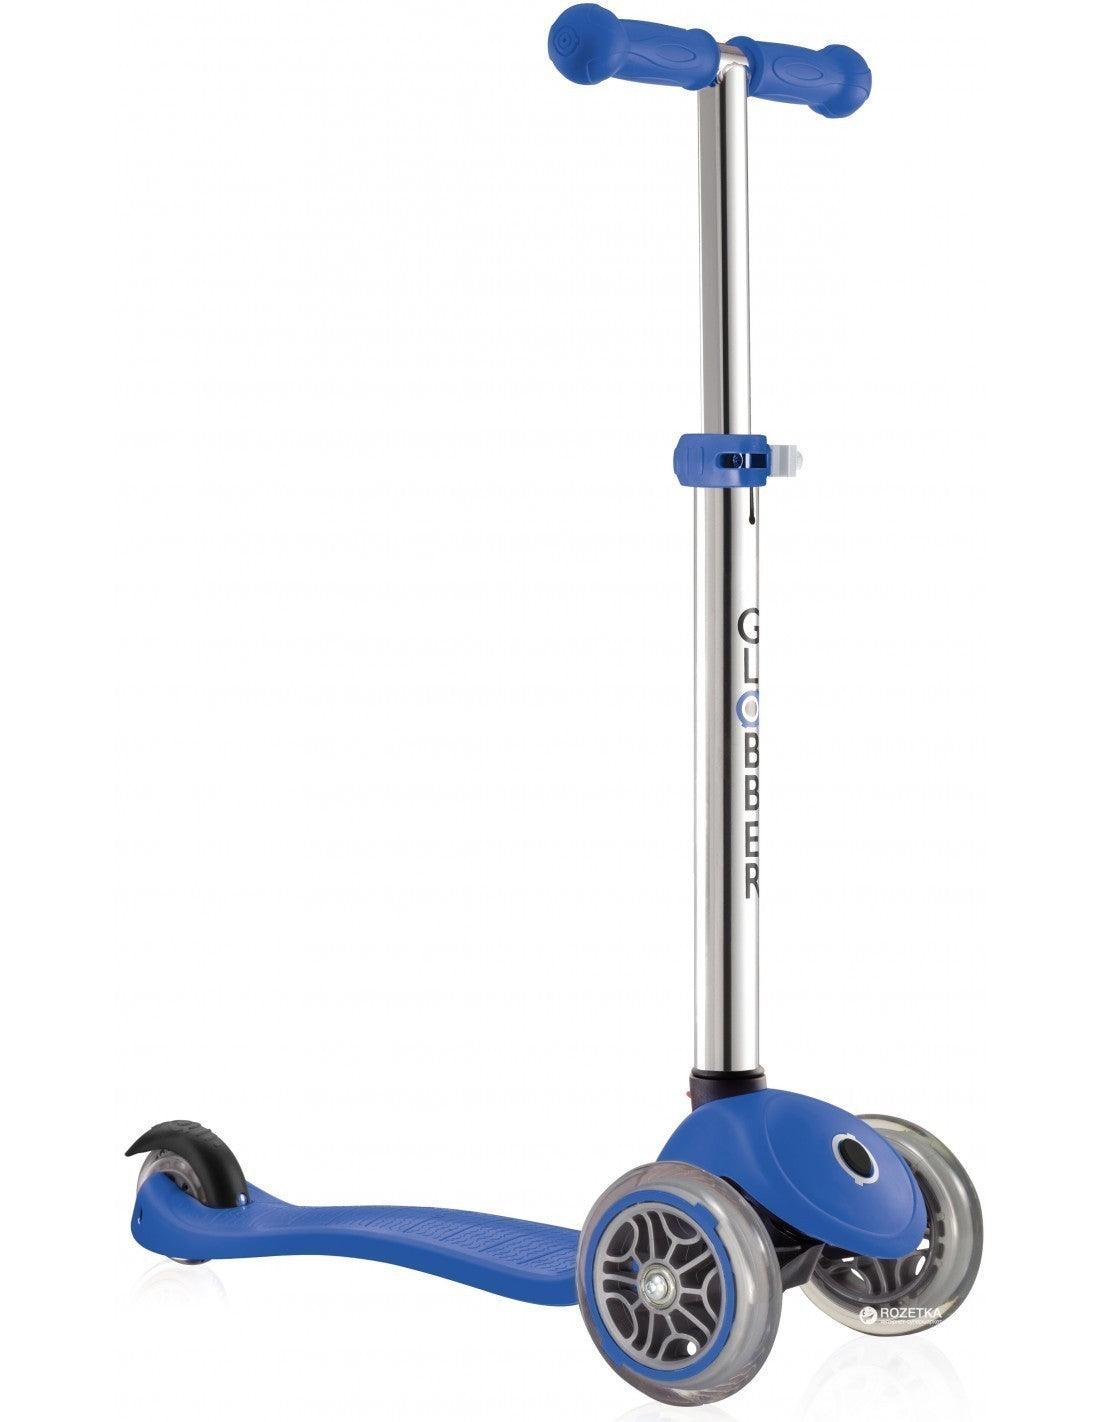 PRIMO - 3 Wheel Scooter for Kids - Neon blue - MoonyBoon